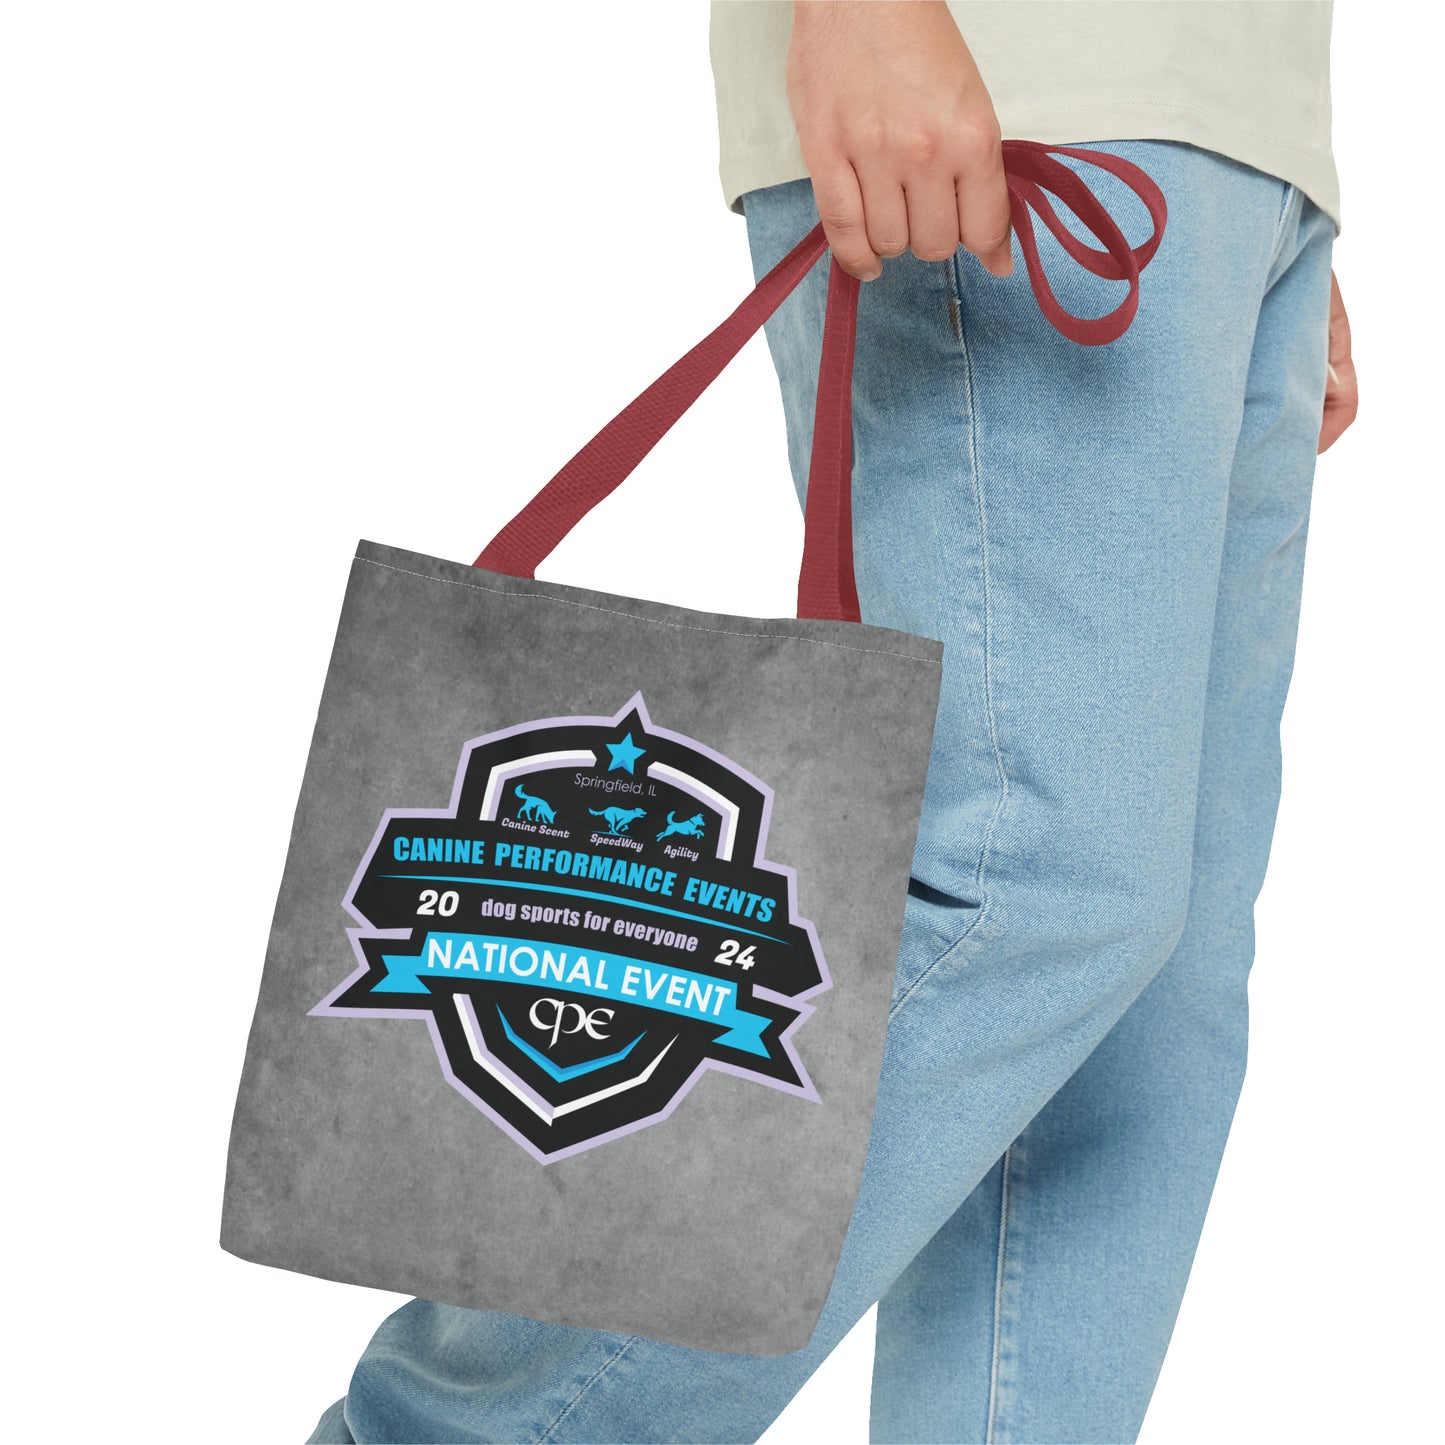 INDIANA CPE NATIONALS Tote Bag